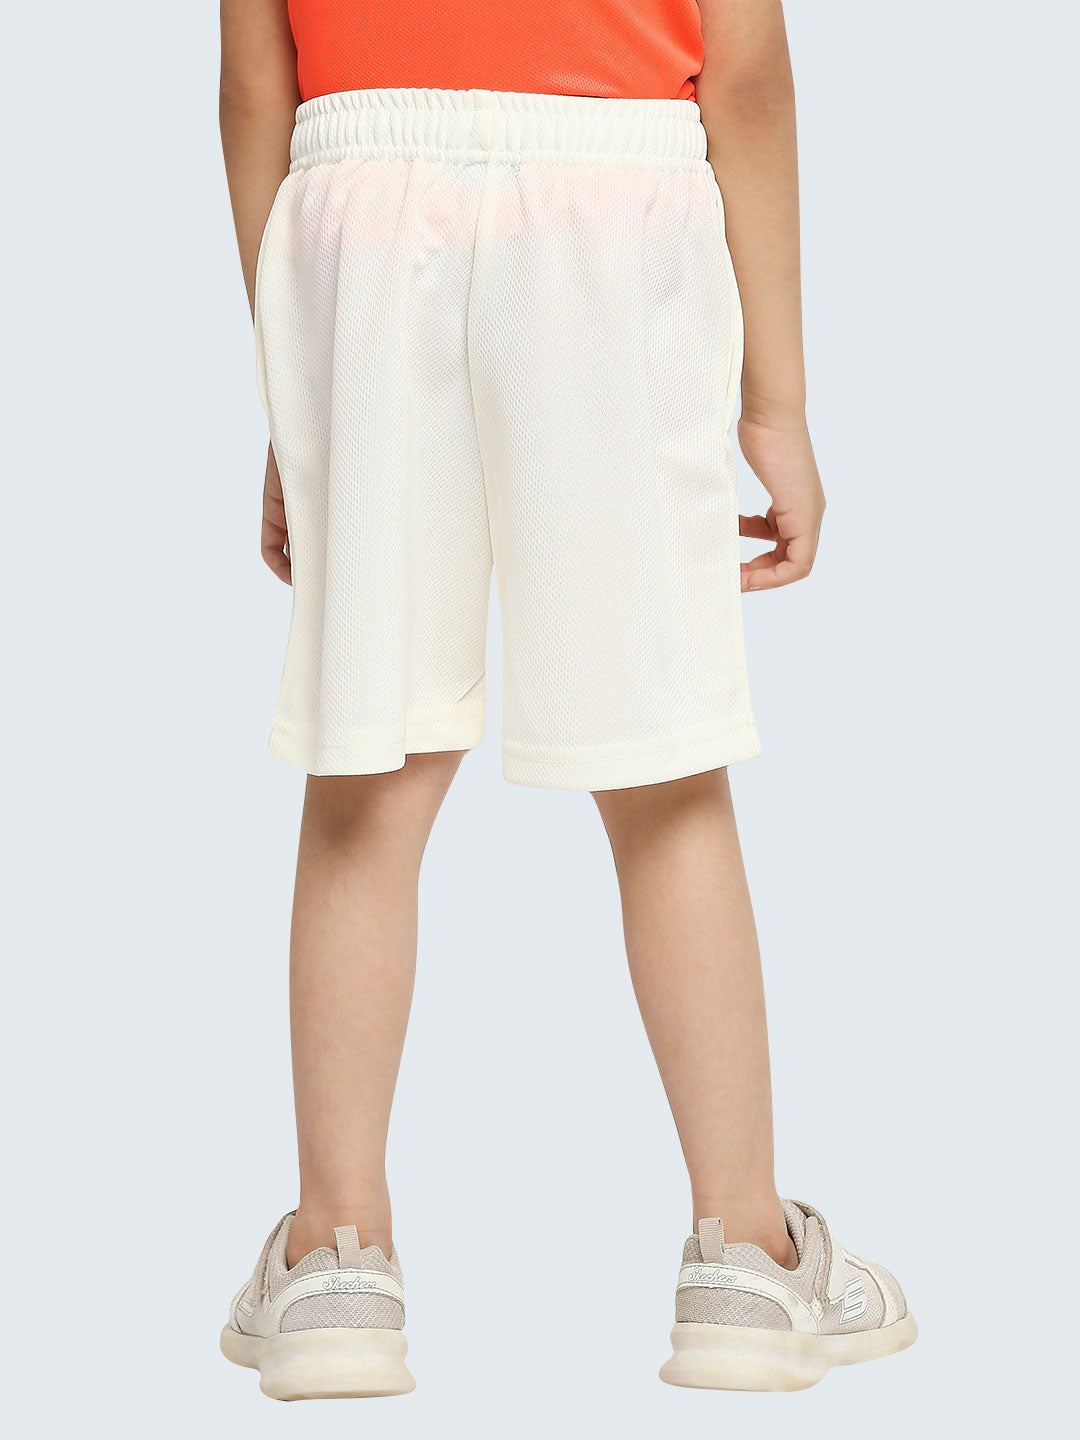 Kid's Solid Active Sports Shorts: Off-White - Front